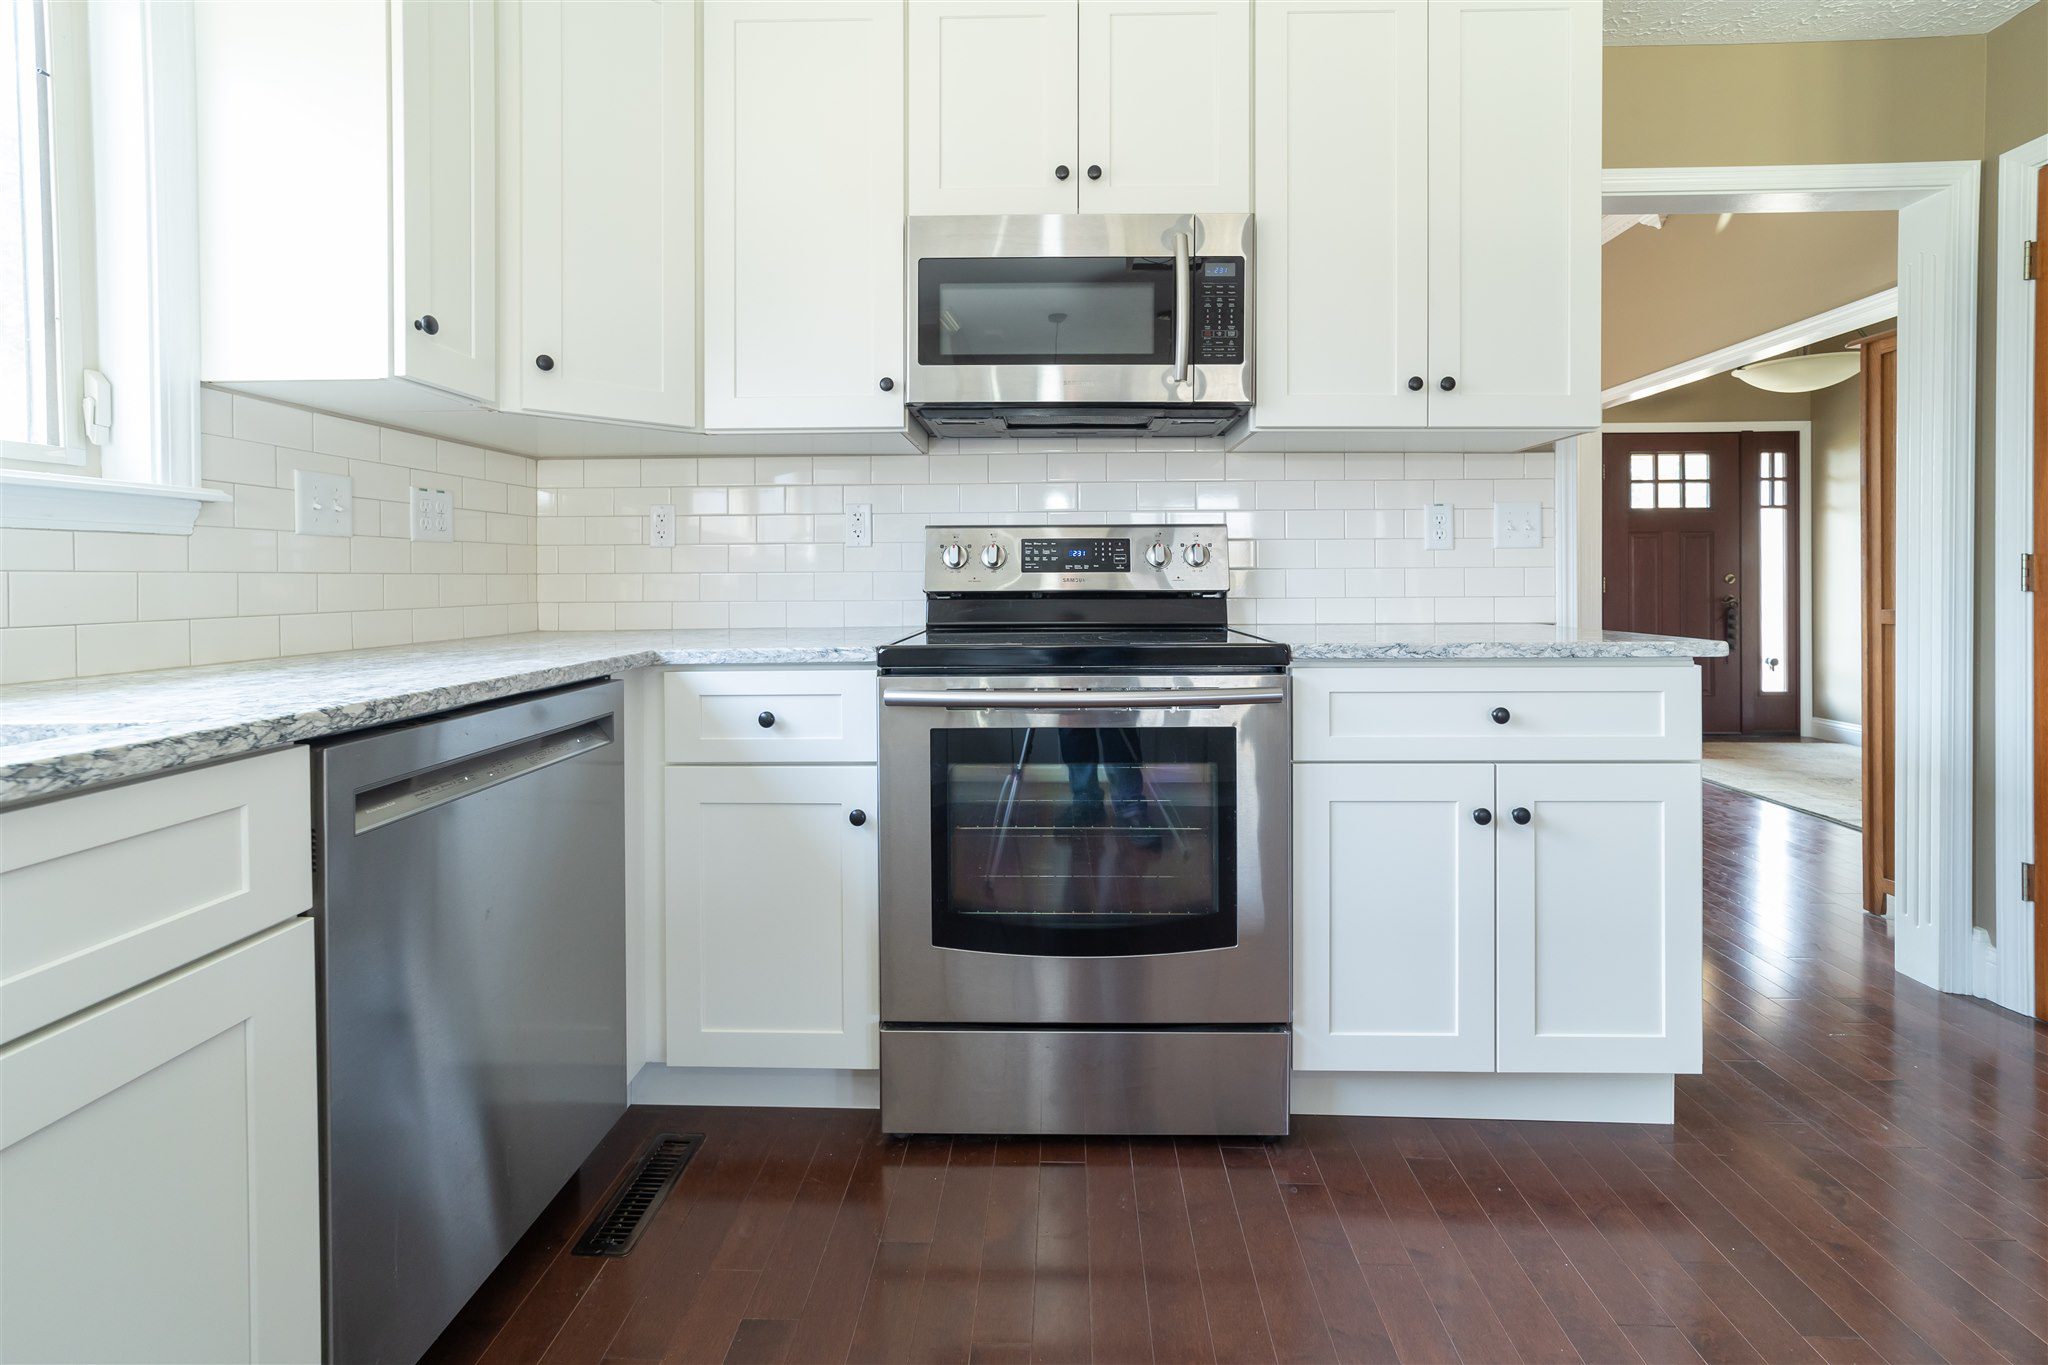 meyerholtz kitchens are remodeled by coors